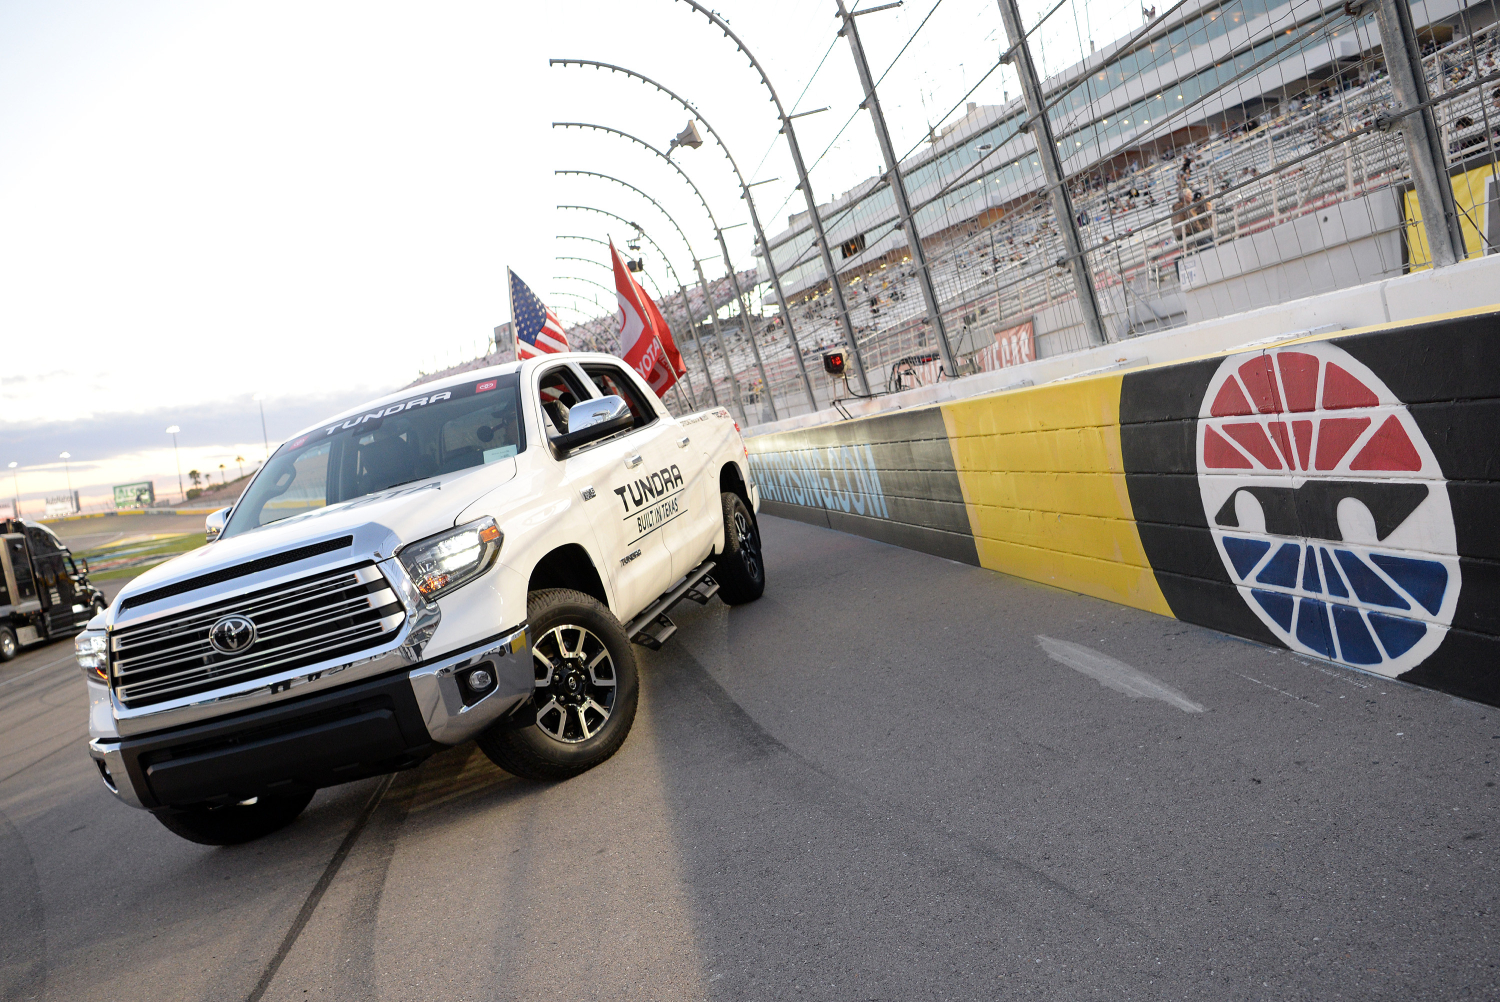 The reliable Toyota Tundra sits on the Nascar track